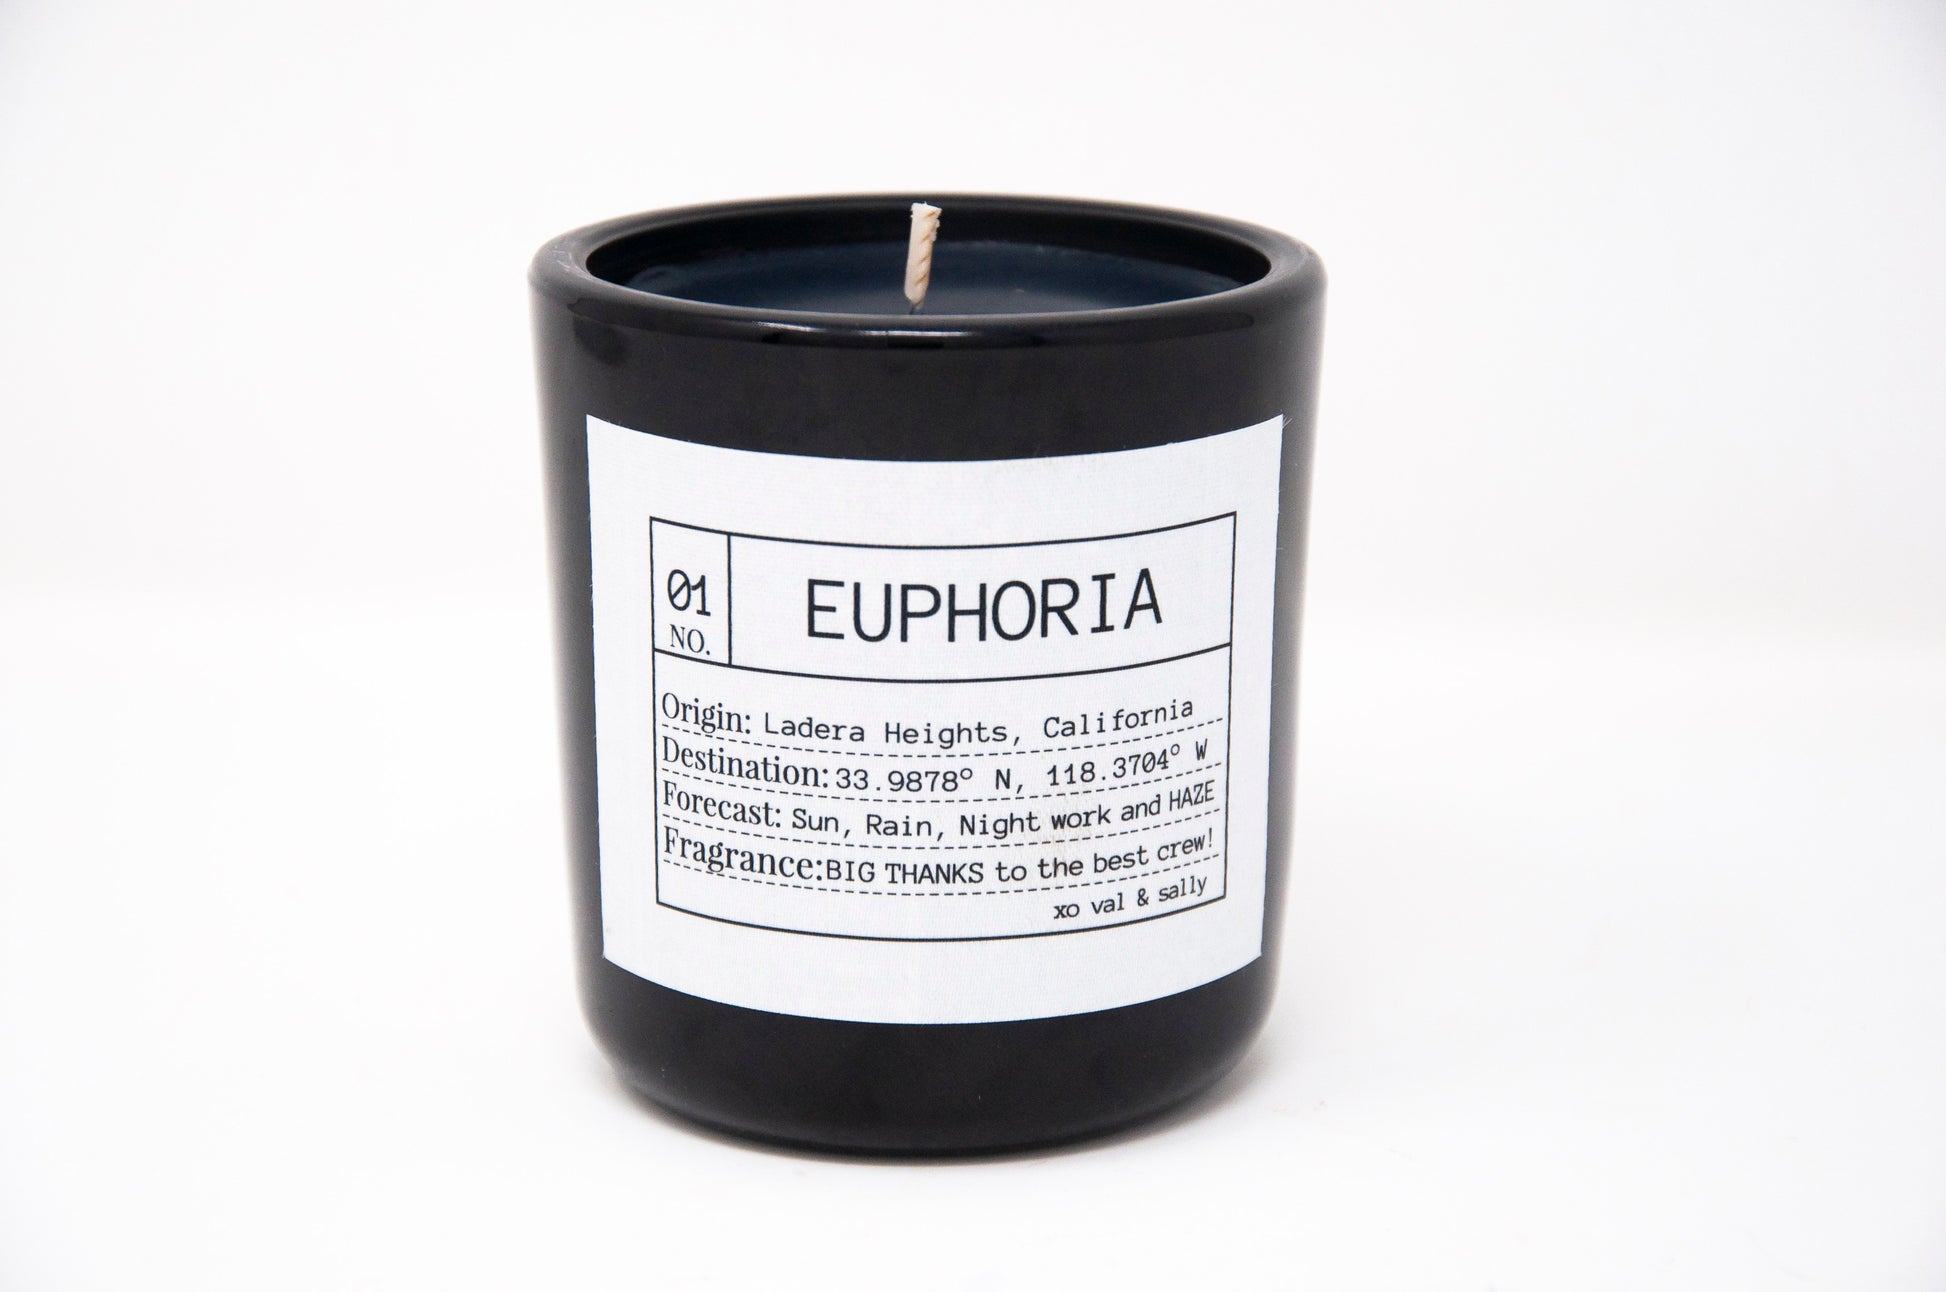 If you're not watching EUPHORIA on HBO, you should stop what you're doing right now and tune in. We were so honored to do the Cast and Crew gifts using our weho scent in black on black.